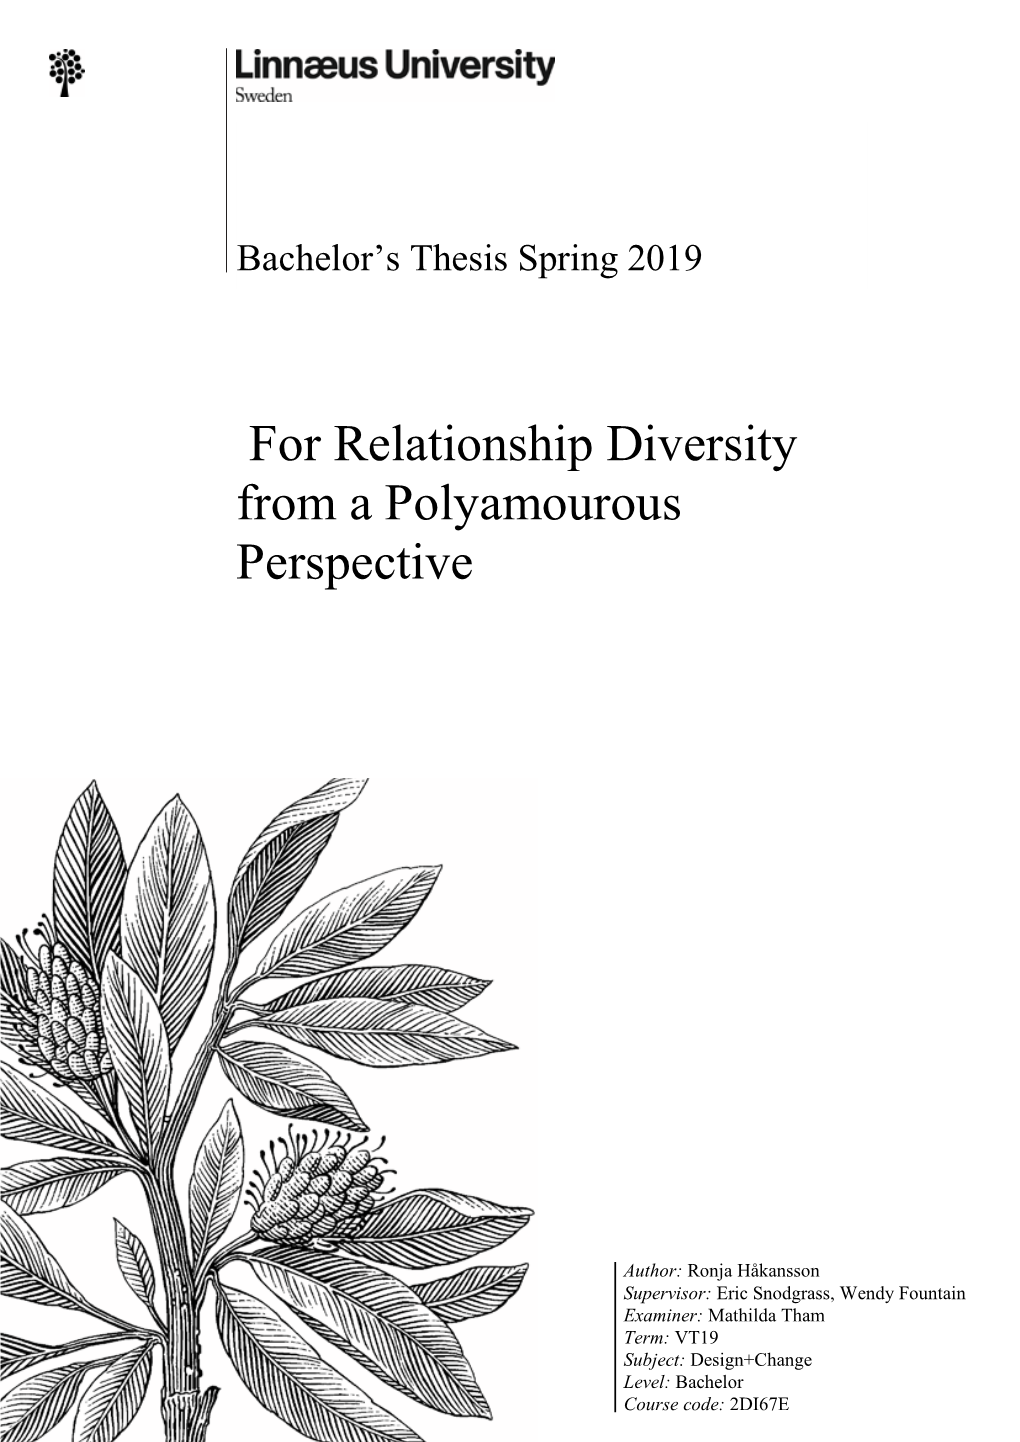 For Relationship Diversity from a Polyamourous Perspective